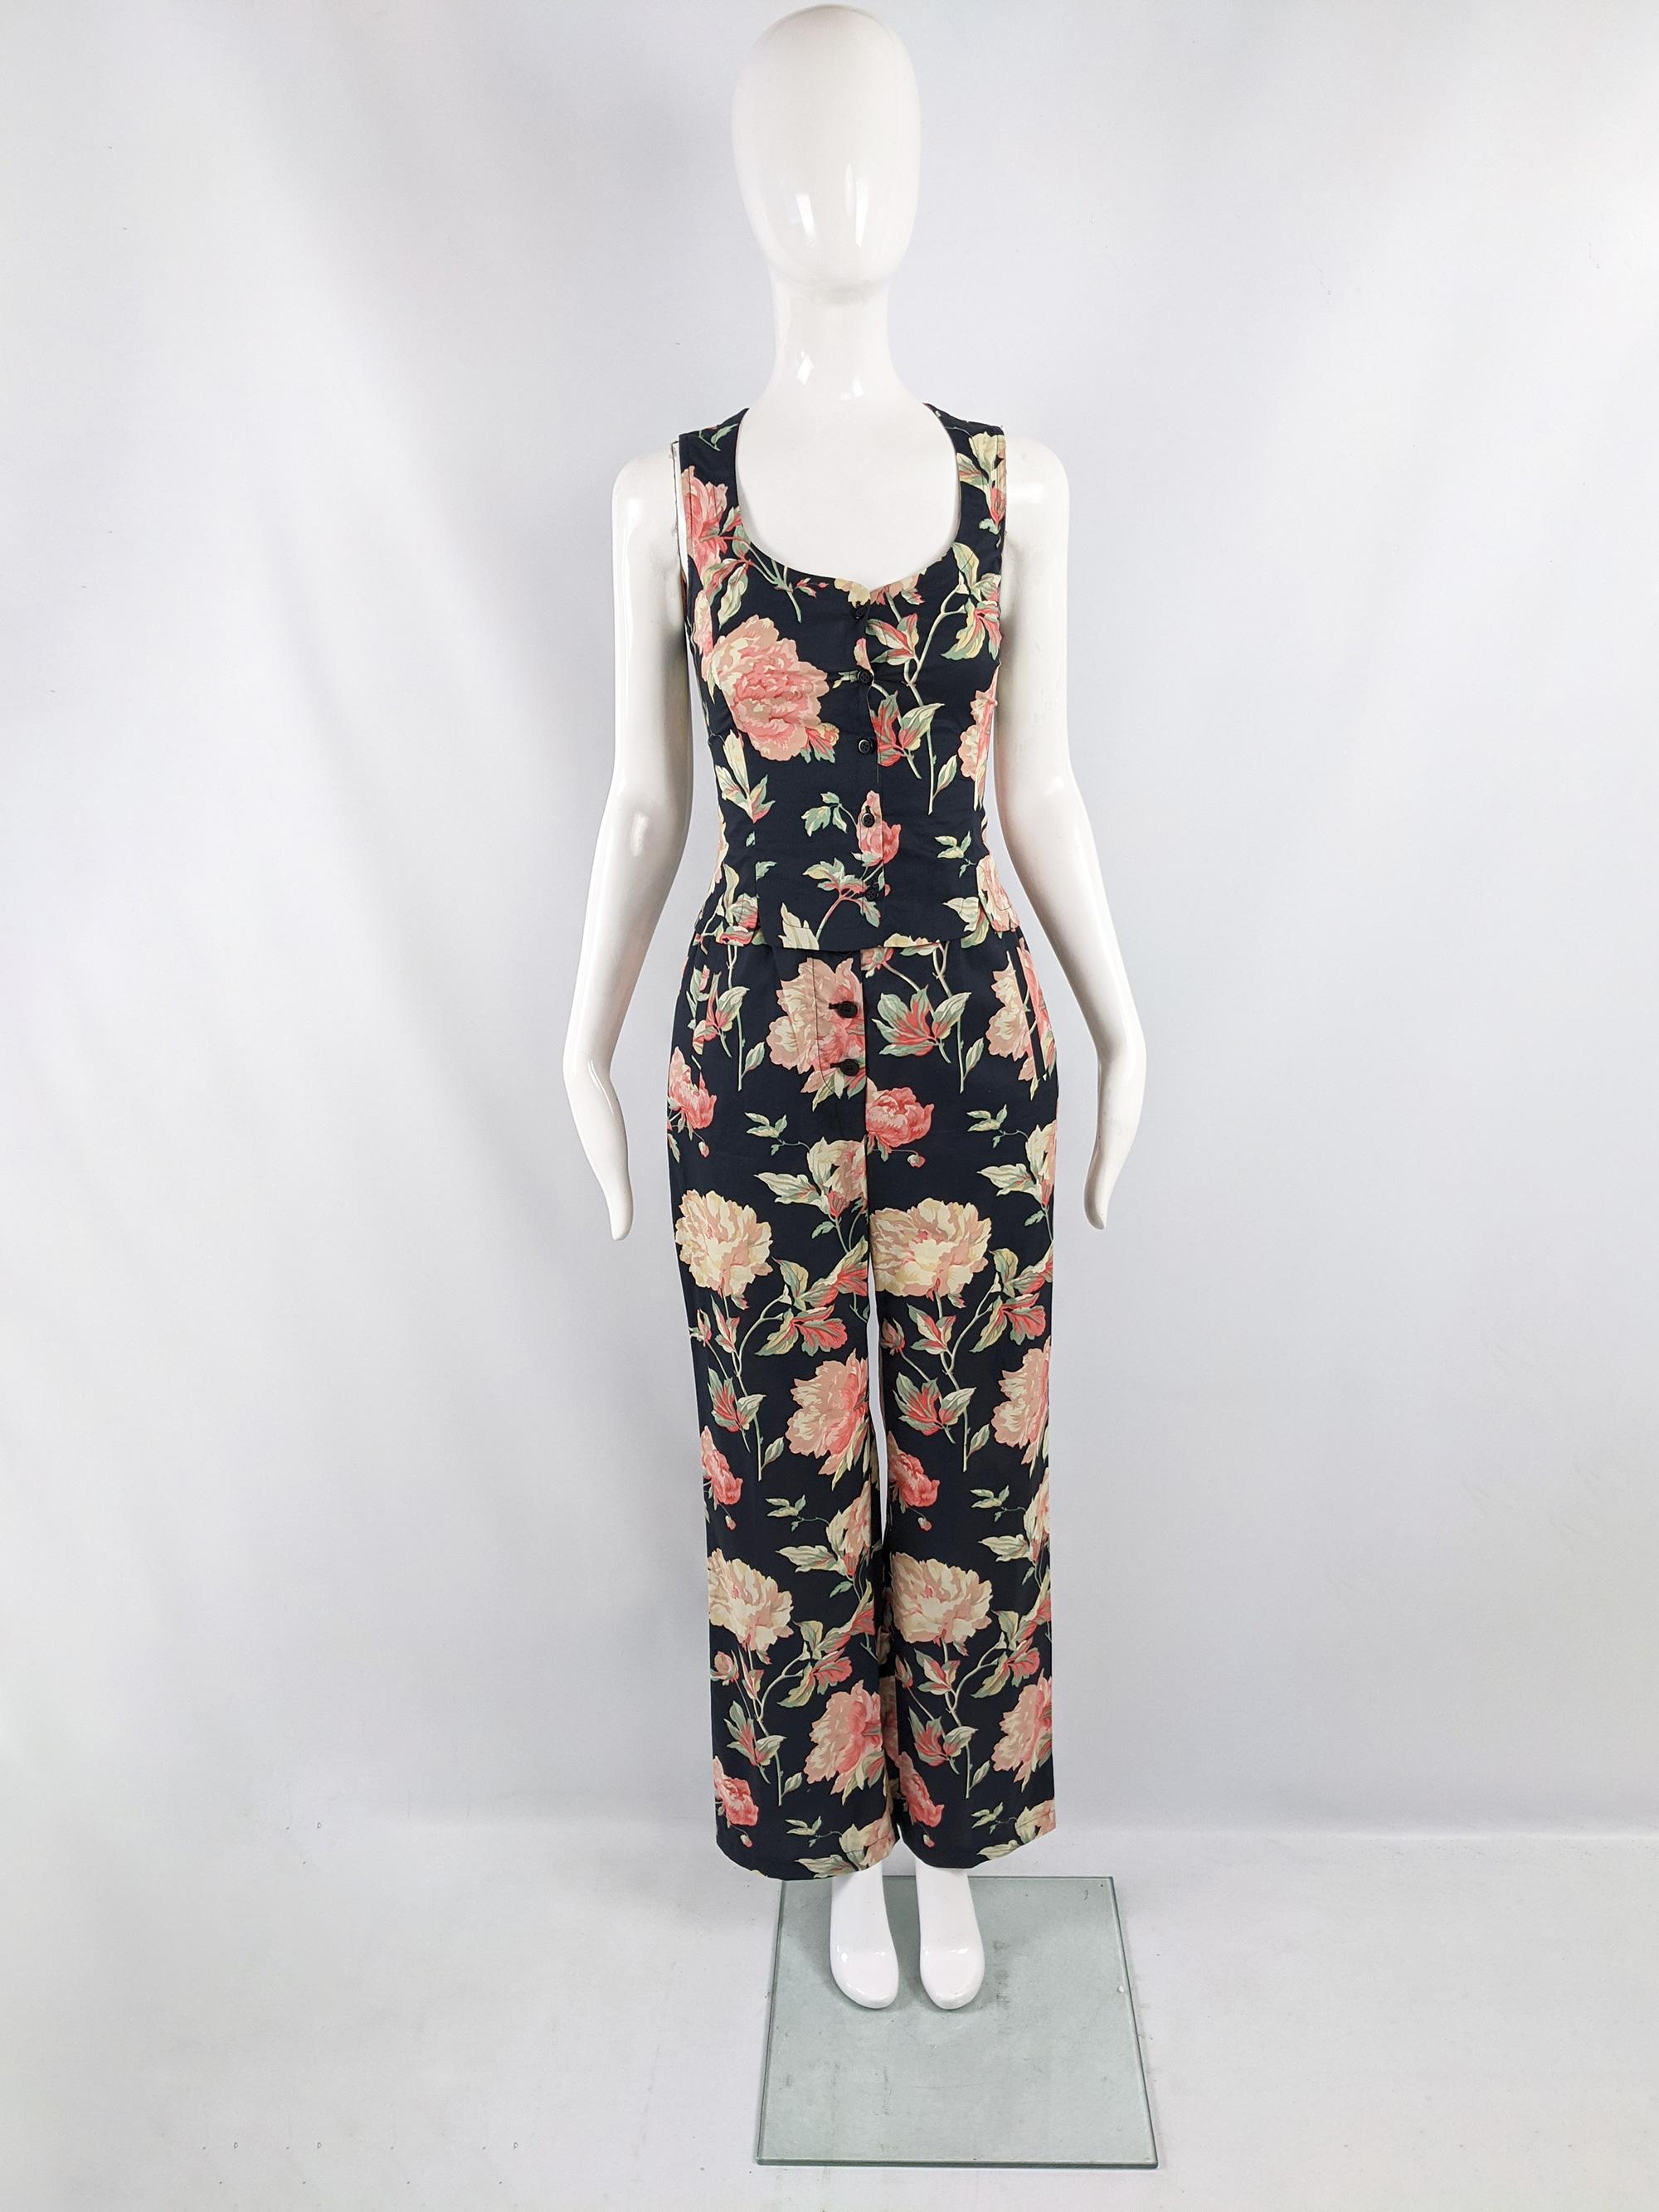 An amazing vintage womens two piece trouser suit from the 90s by luxury Italian label, Cerruti 1881. In a black cotton with a bold pink floral print throughout. Consisting of a sleeveless jacket / vest and high waisted, wide leg pants. 

Size: The